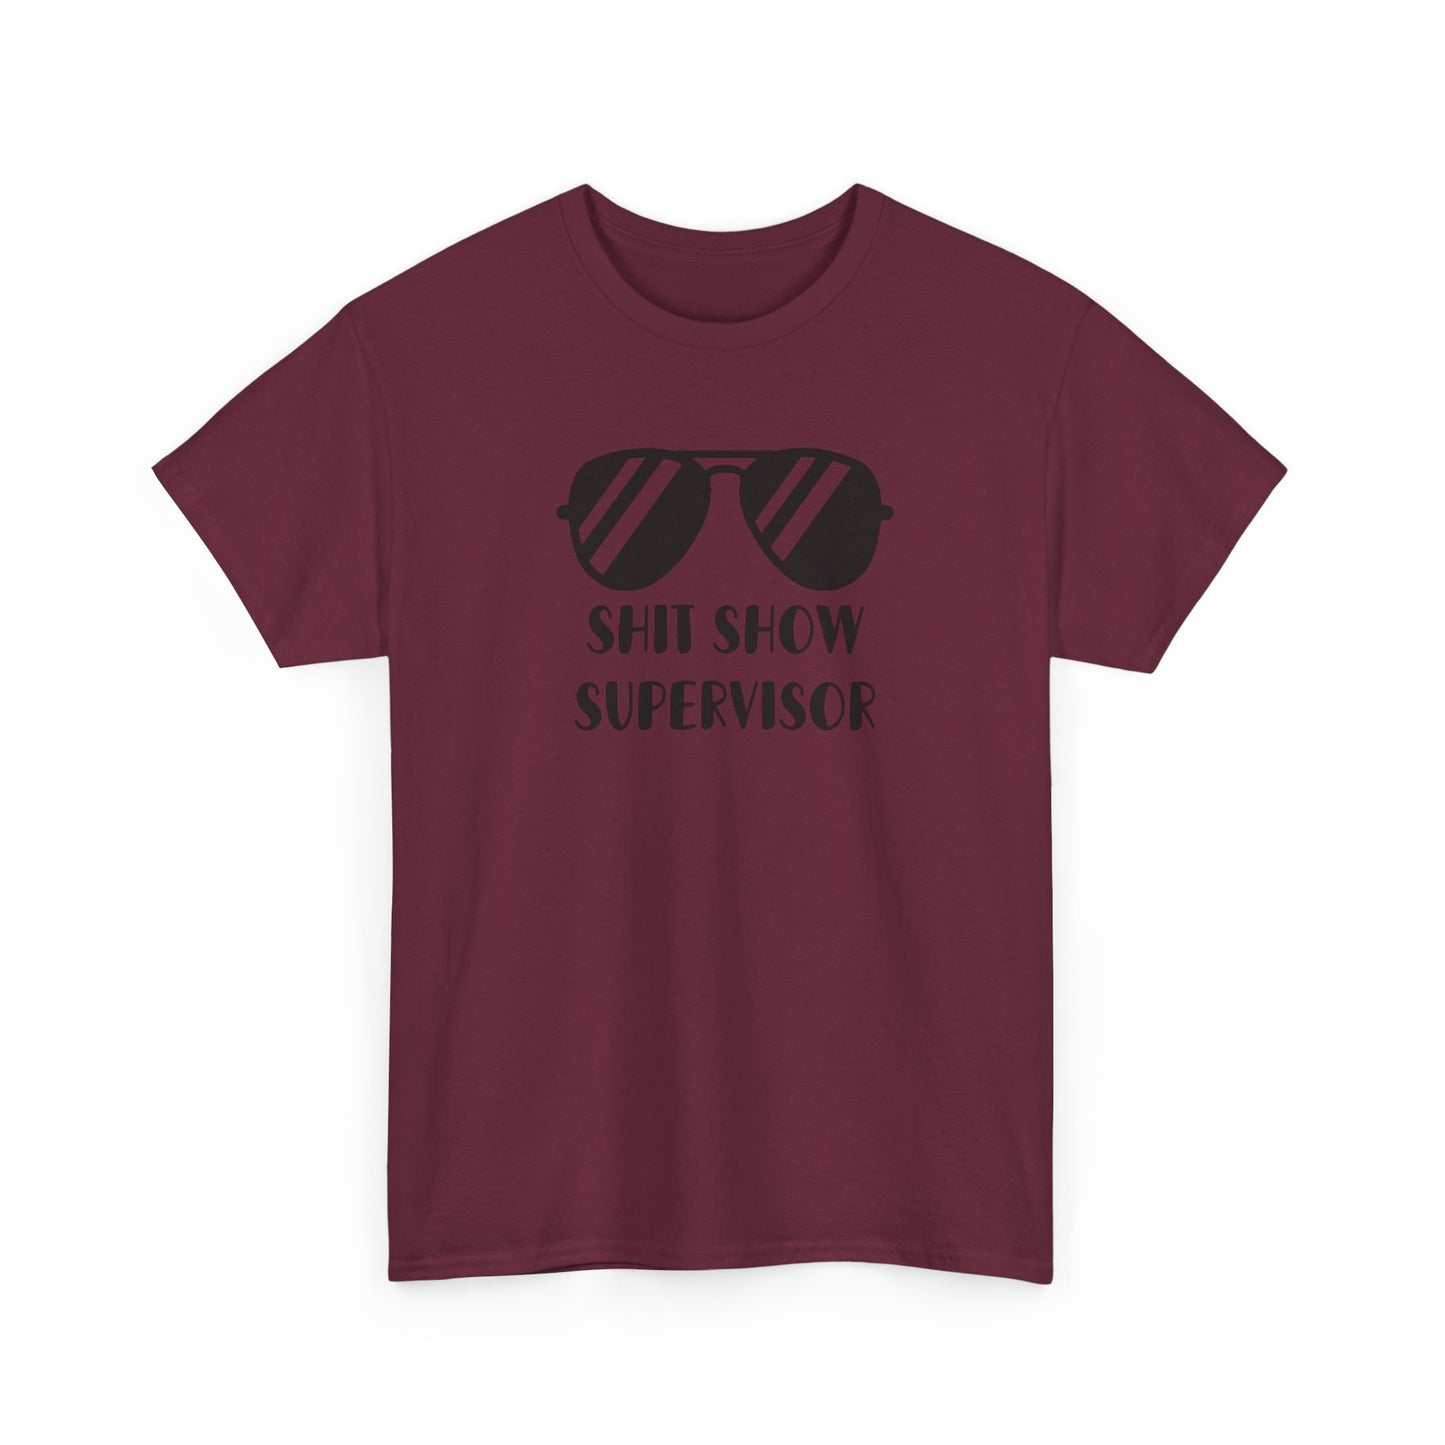 Shit Show Supervisor Unisex Heavy Cotton Tee up to 5XL, Mother's Day Gift, CoWorker Tee, Supervisor Gift, Boss Gift, Funny Shirt